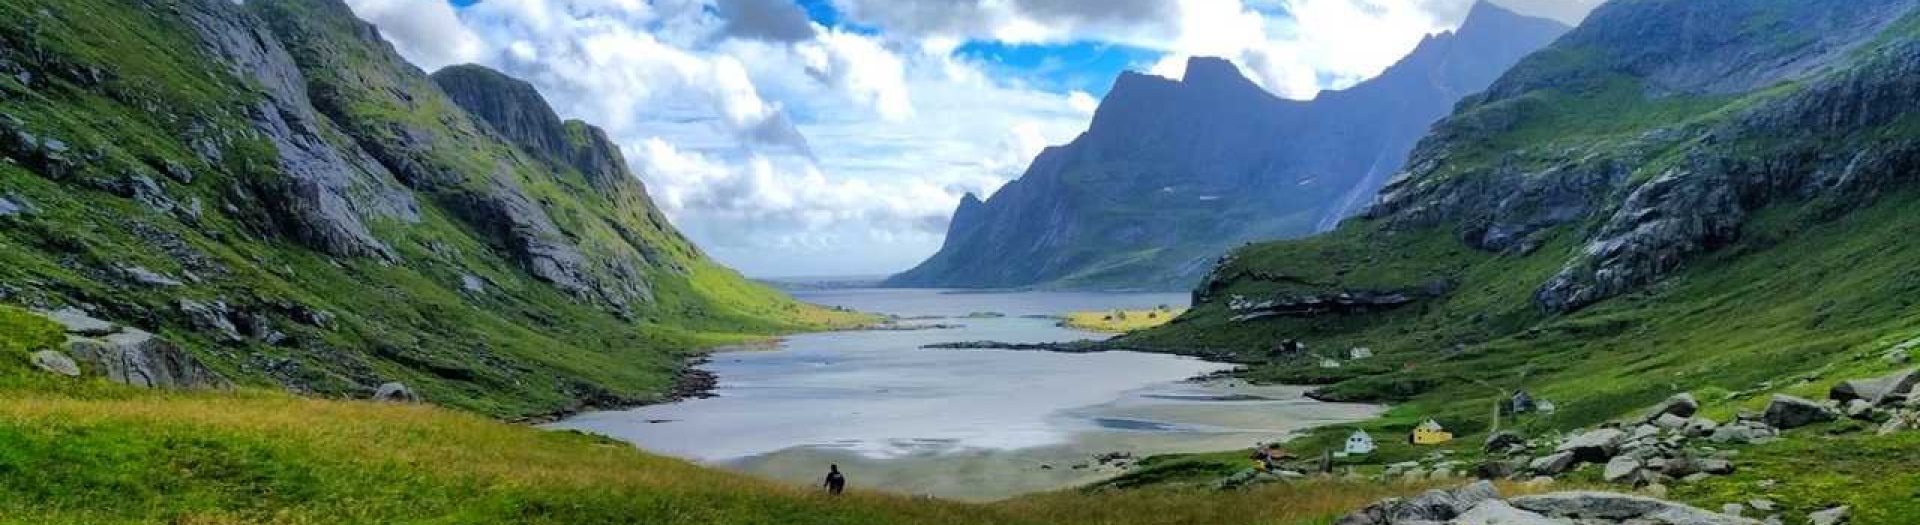 Best of Norway : southerns fjords and northerns archipelago